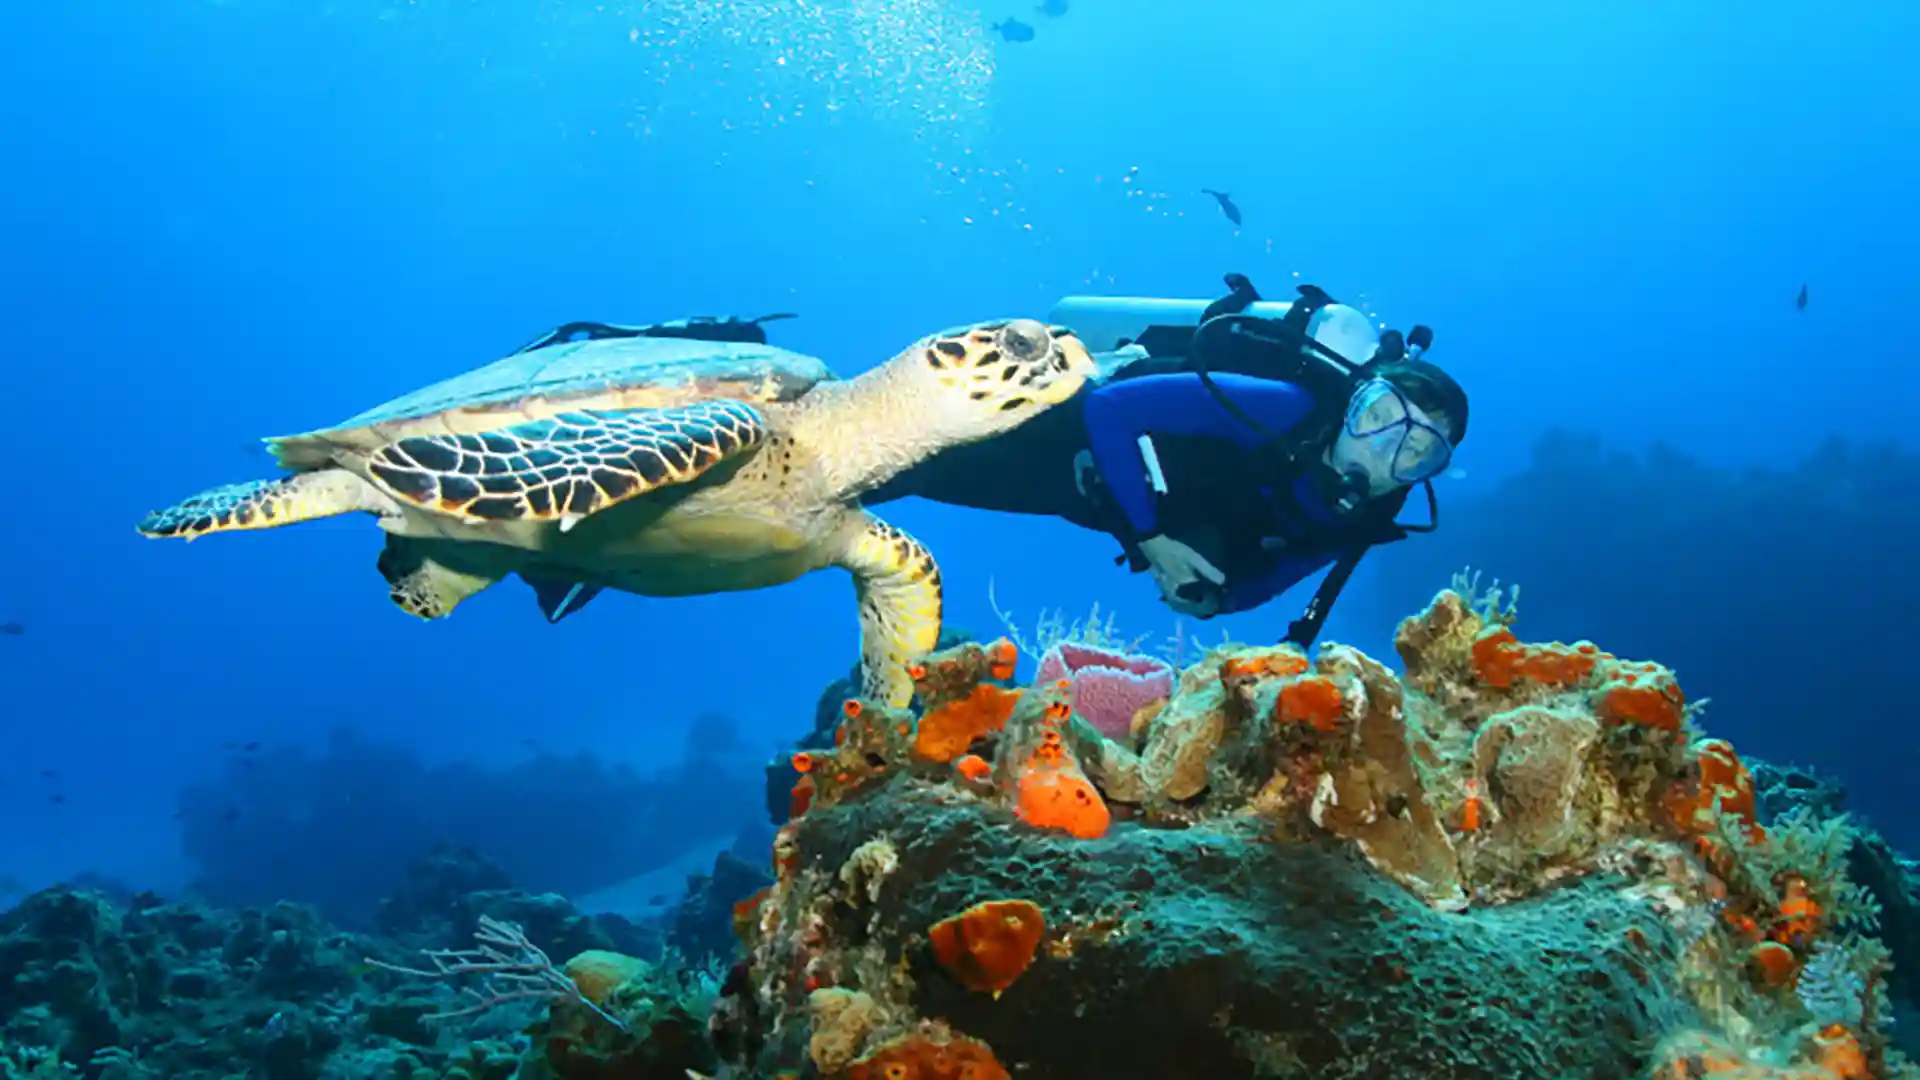 View of person snorkeling near sea turtle in Cozumel above coral reefs.